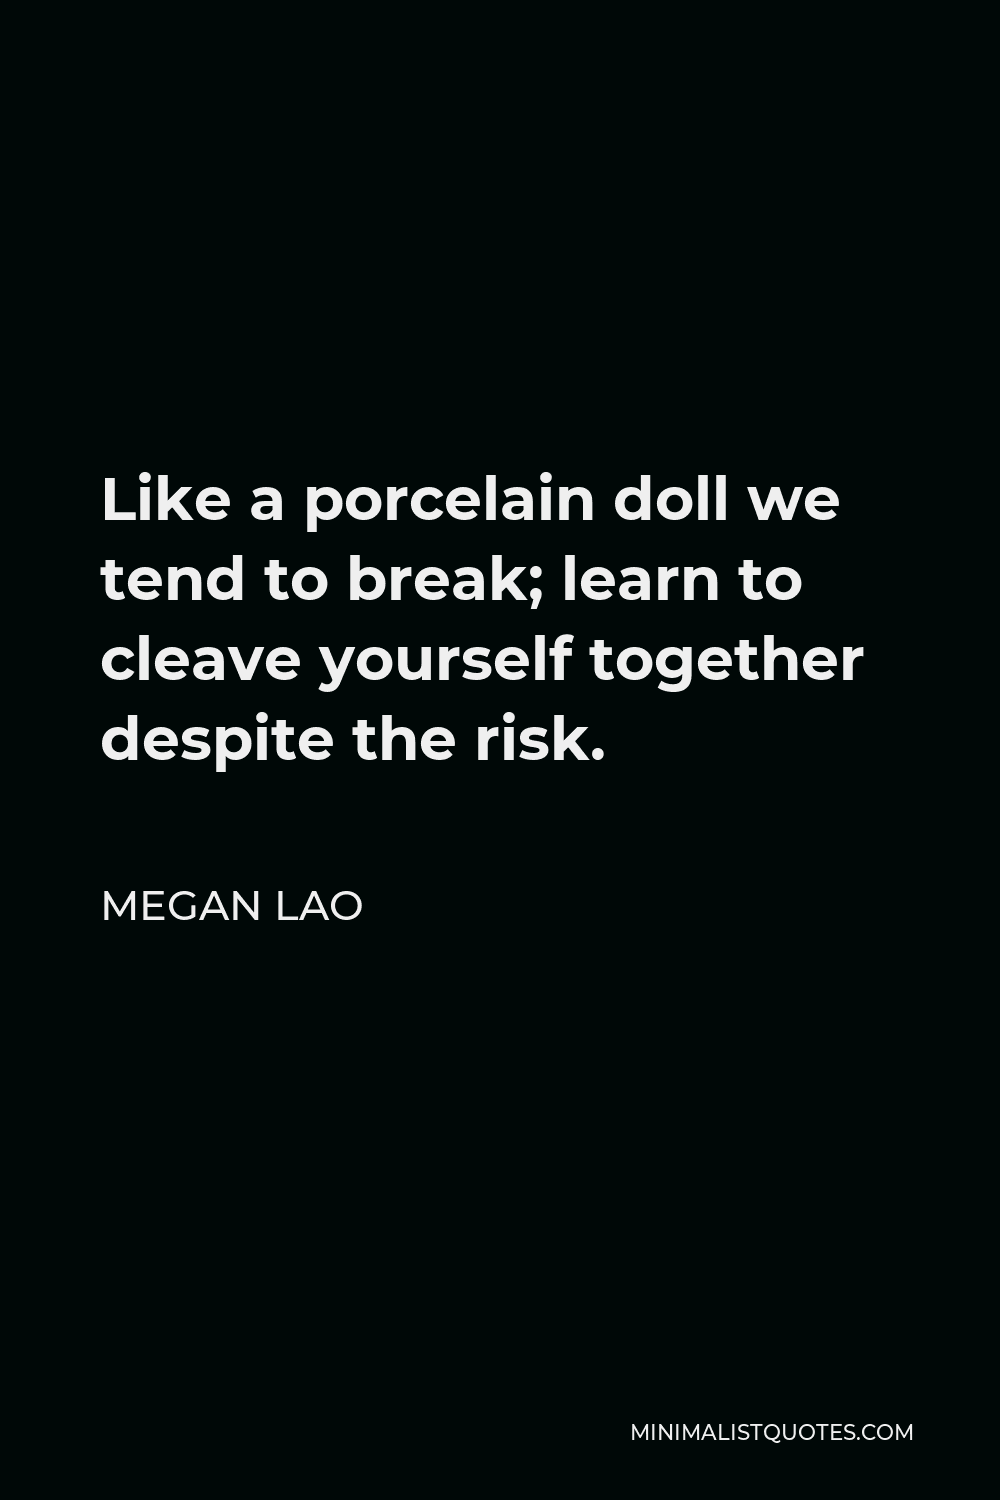 Megan Lao Quote - Like a porcelain doll we tend to break; learn to cleave yourself together despite the risk.